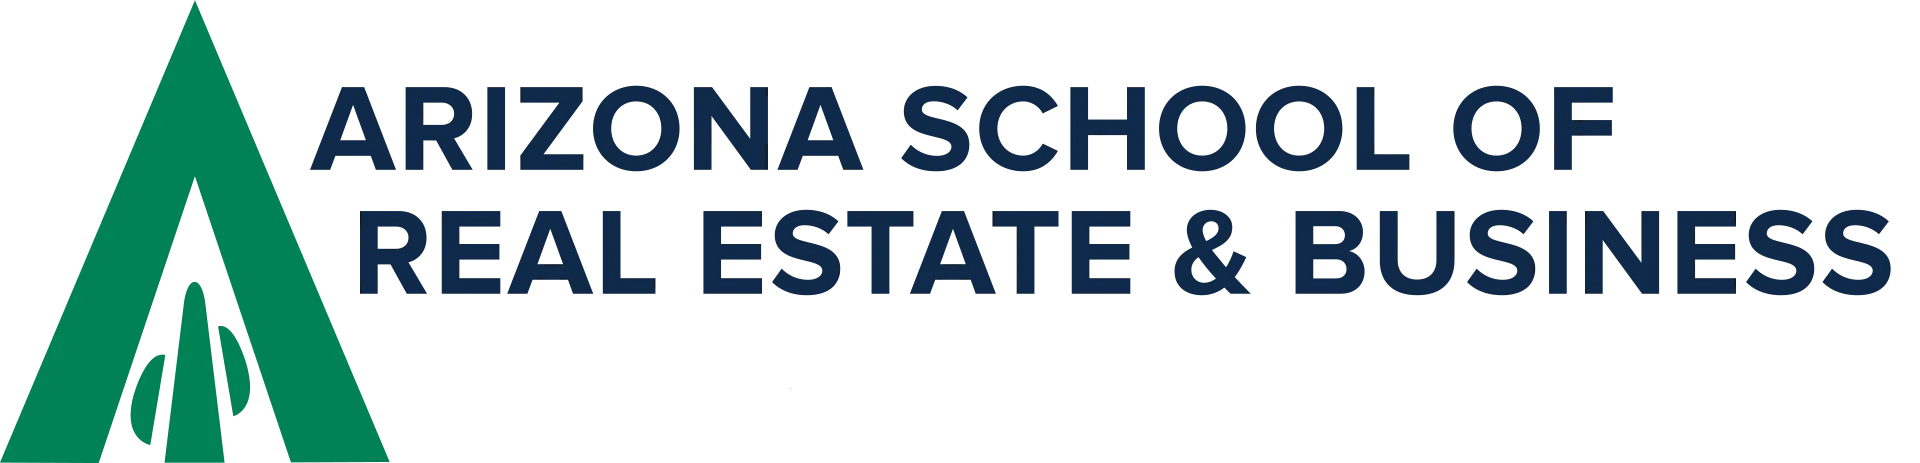 Arizona School of Real Estate and Business